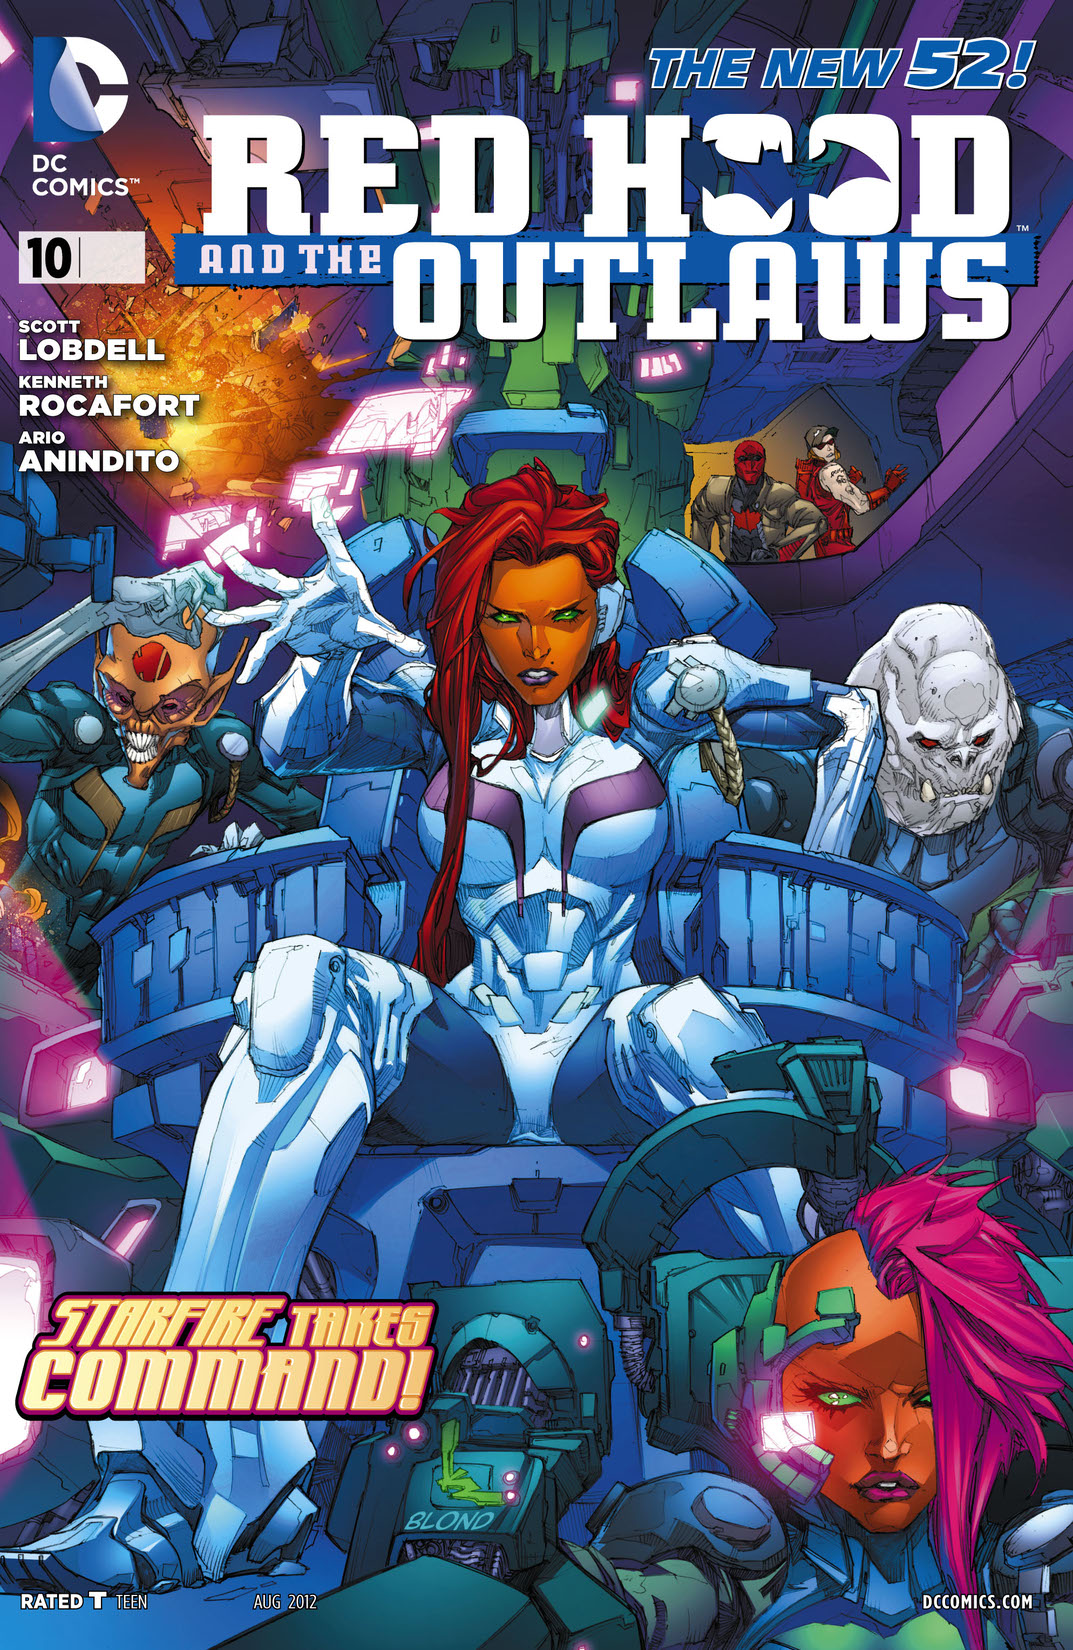 Red Hood and the Outlaws (2011-) #10 preview images